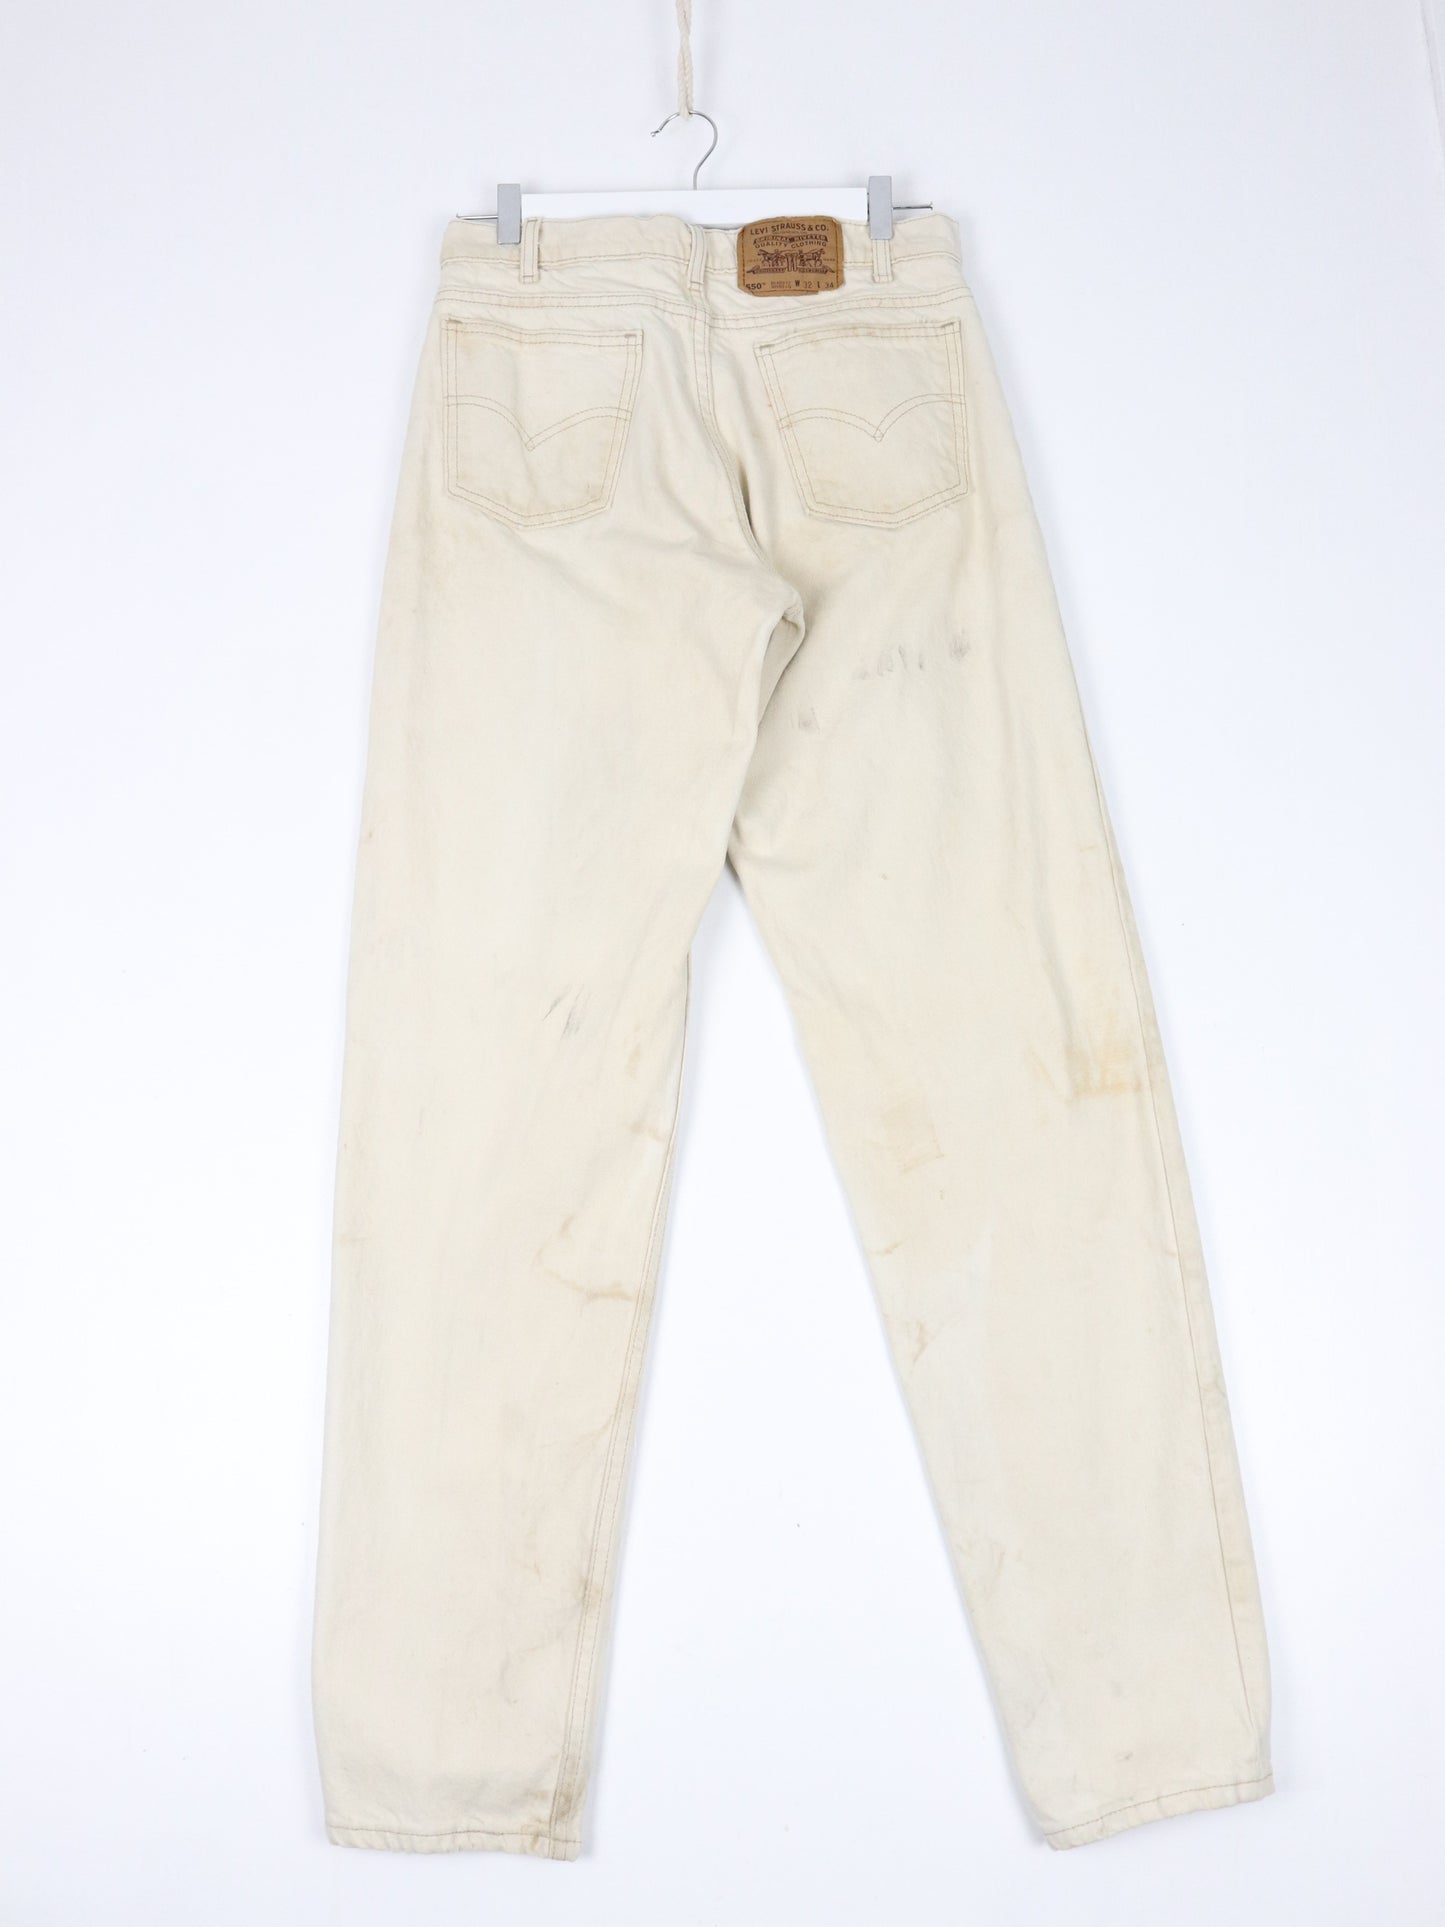 Vintage Levi's Pants Fits Mens 30 x 34 Beige Denim Jeans 550 Relaxed Tapered